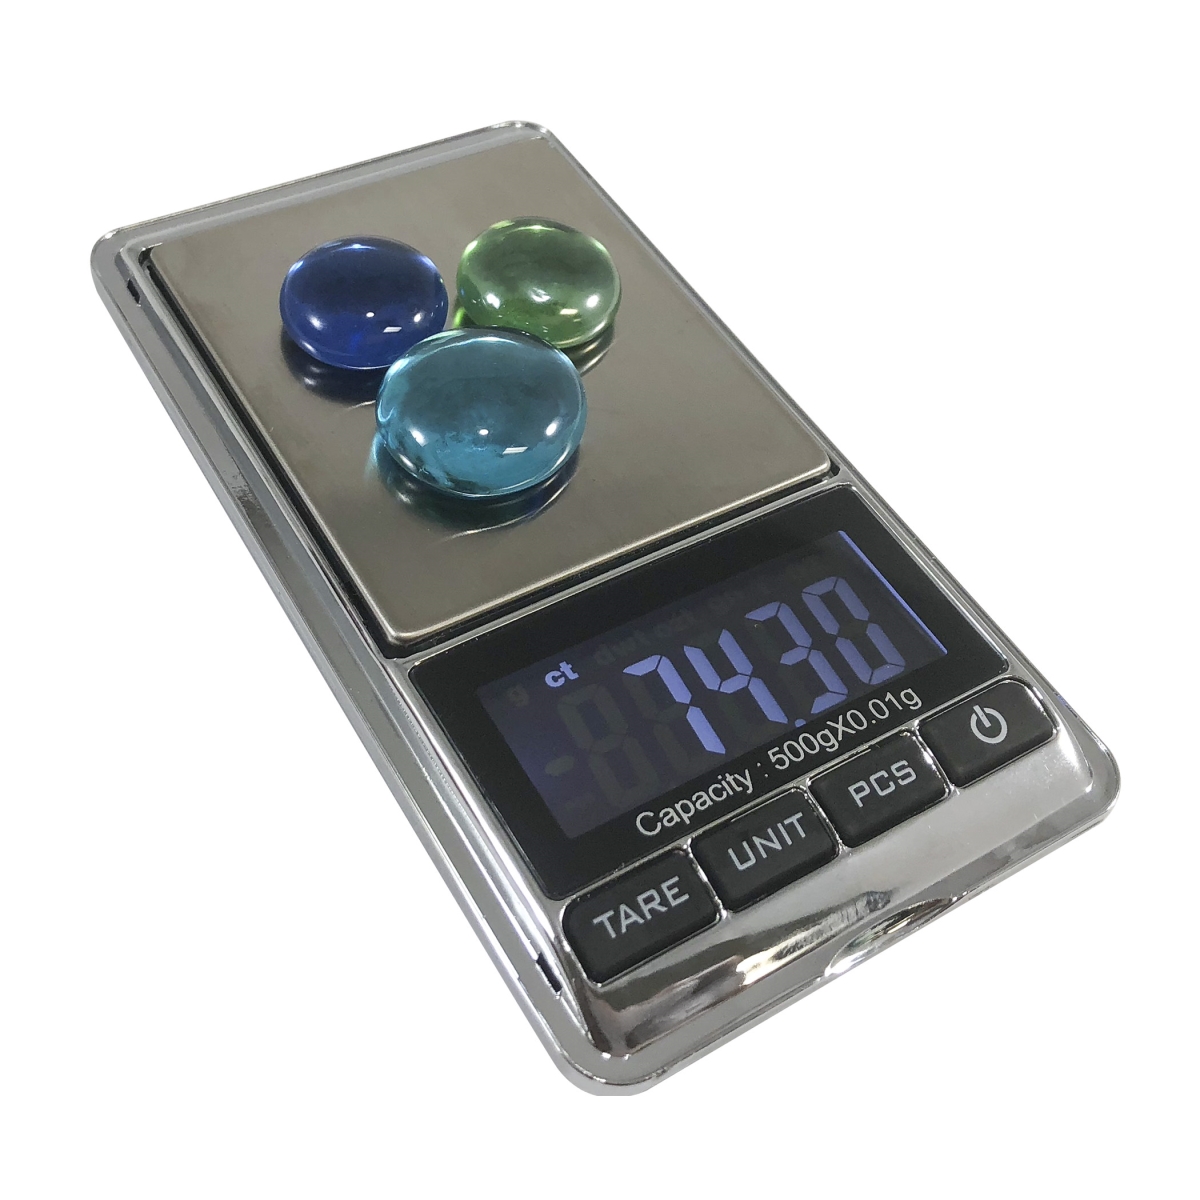 Optima Home Scales St-502 Sterling Pocket Scale With Lid Weighing Tray, Silver - 500 X 0.01 G - 0.75 X 2.5 X 4.5 In.